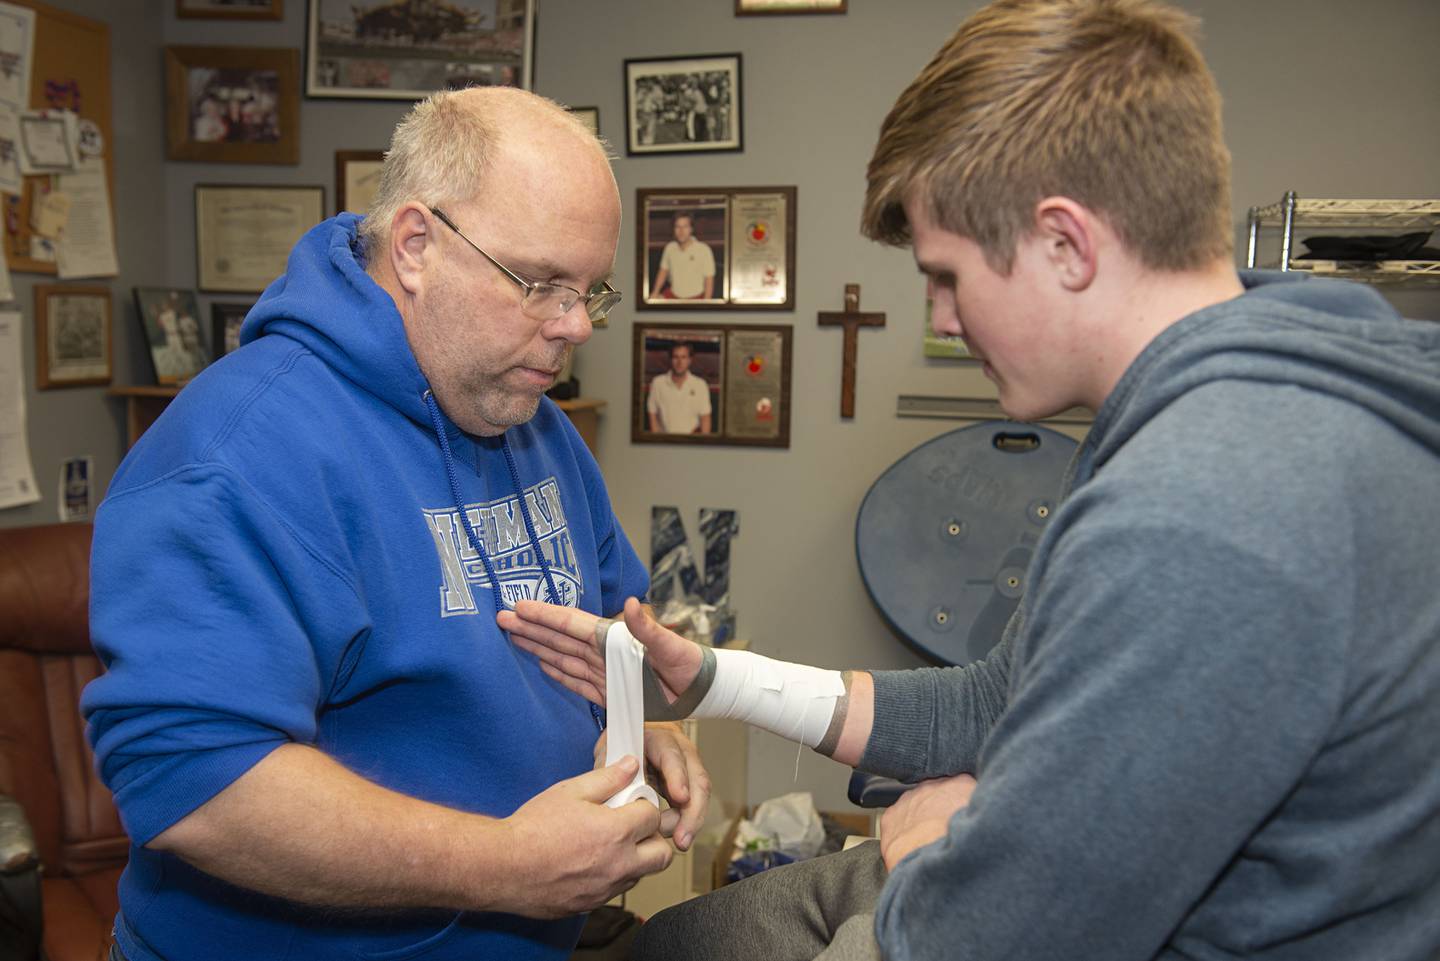 Newman athletic trainer Andy Accardi wraps up son Christopher's wrist before practice at the school.